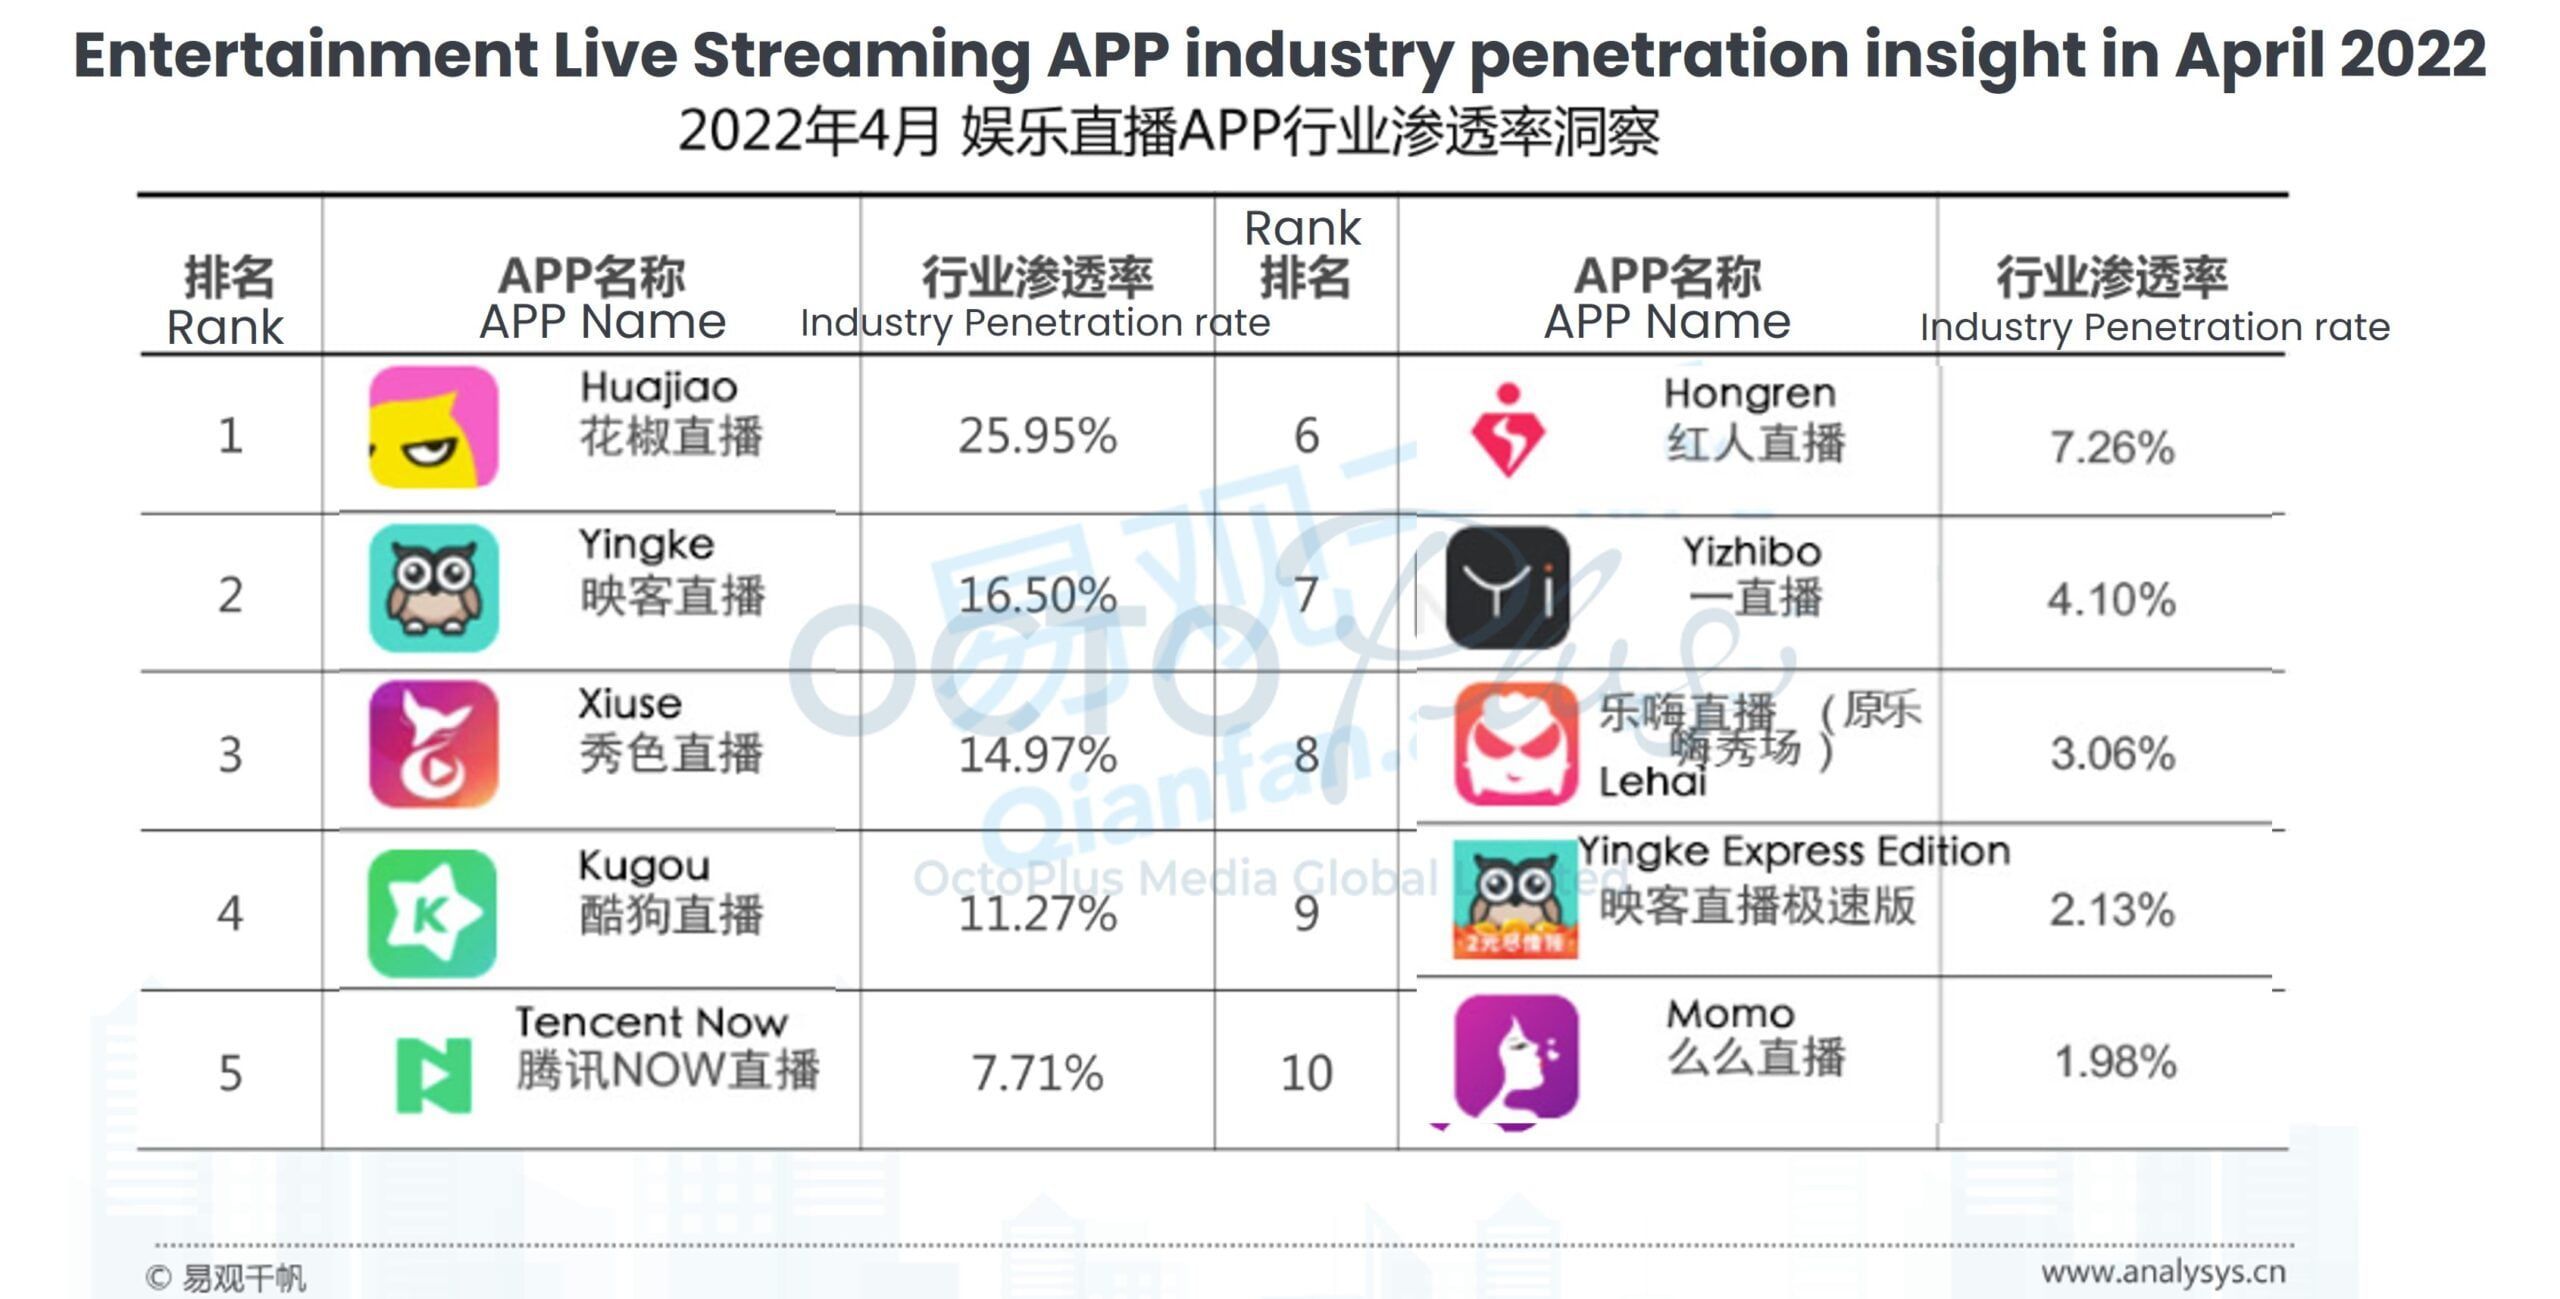 Entertainment Live Streaming APP industry penetration insight in April 2022